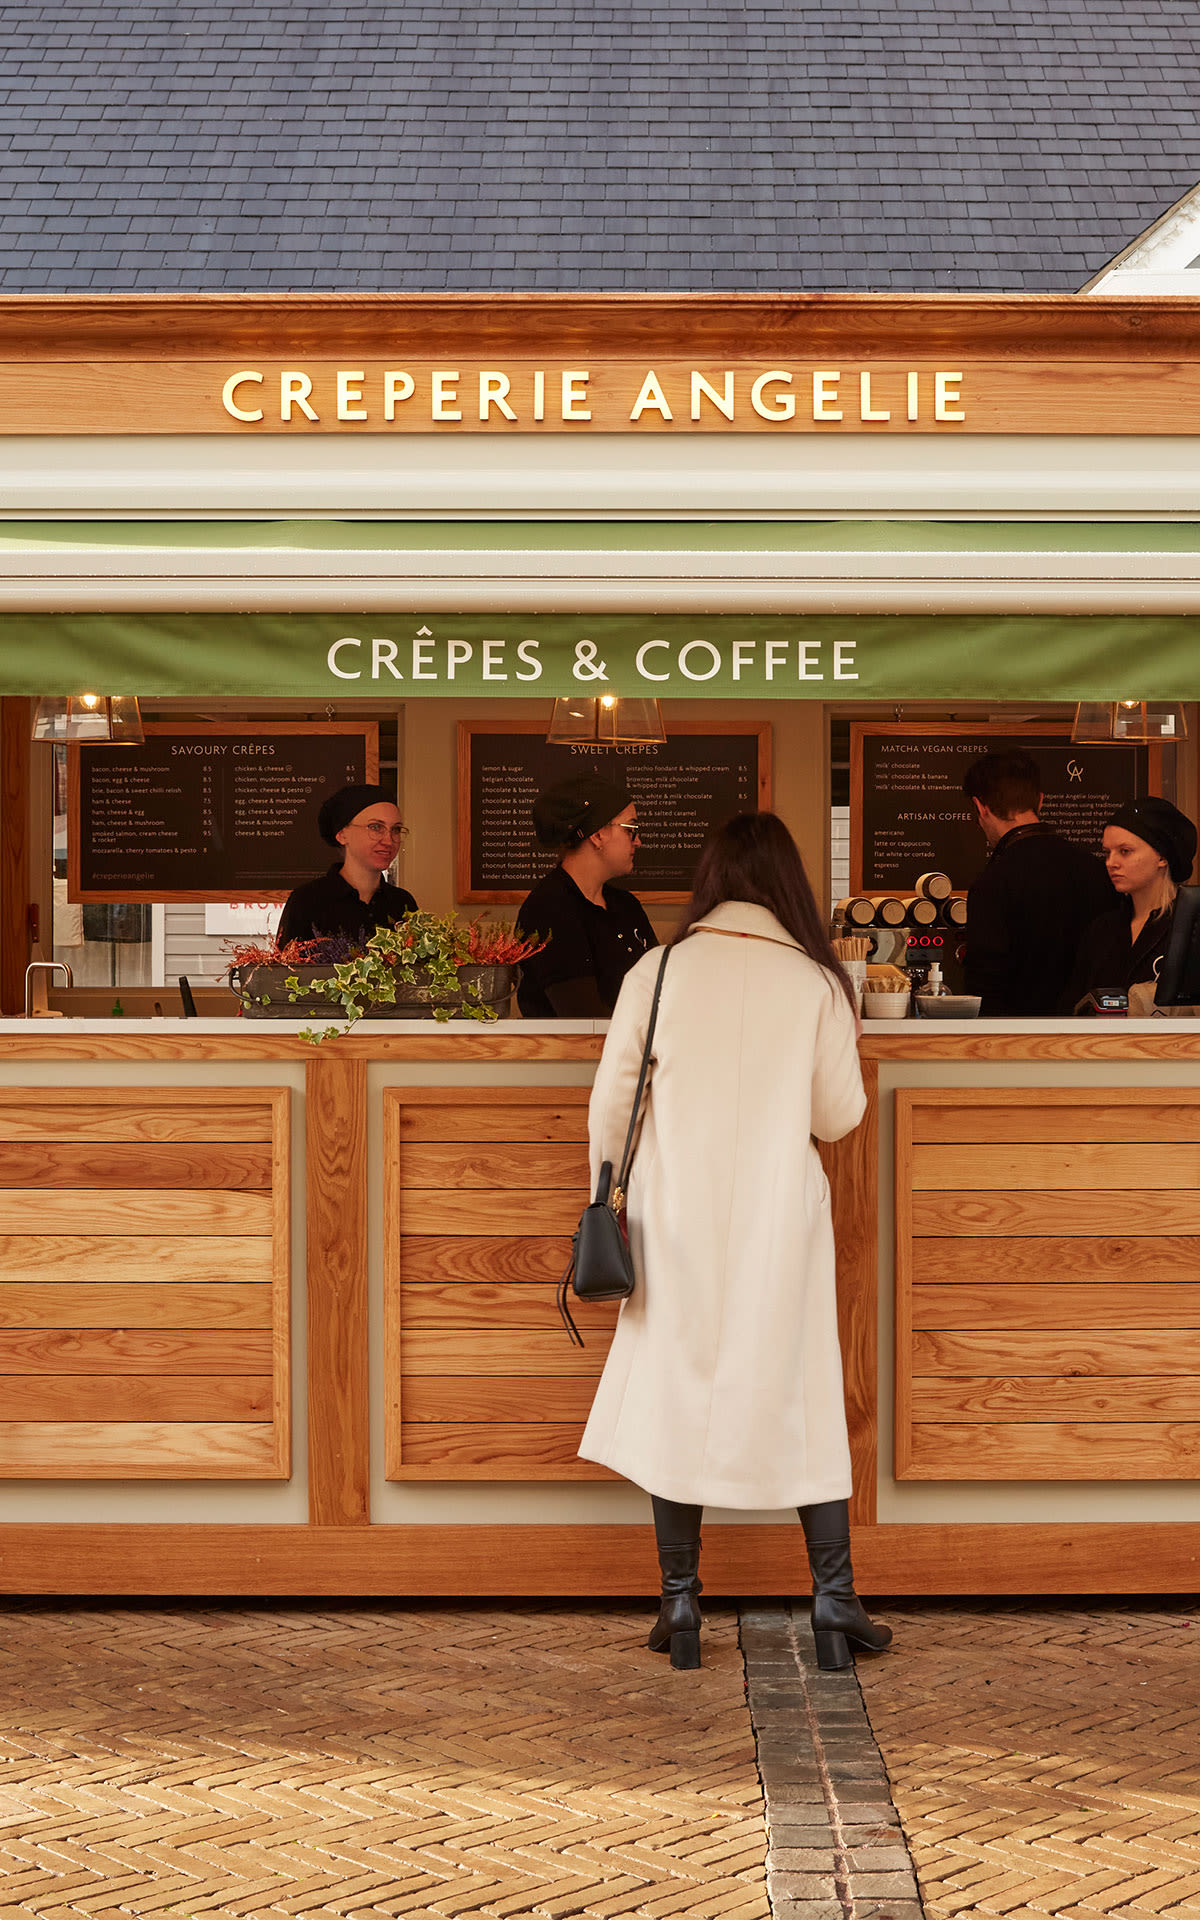 Bicester Village Creperie Angelie Main Image